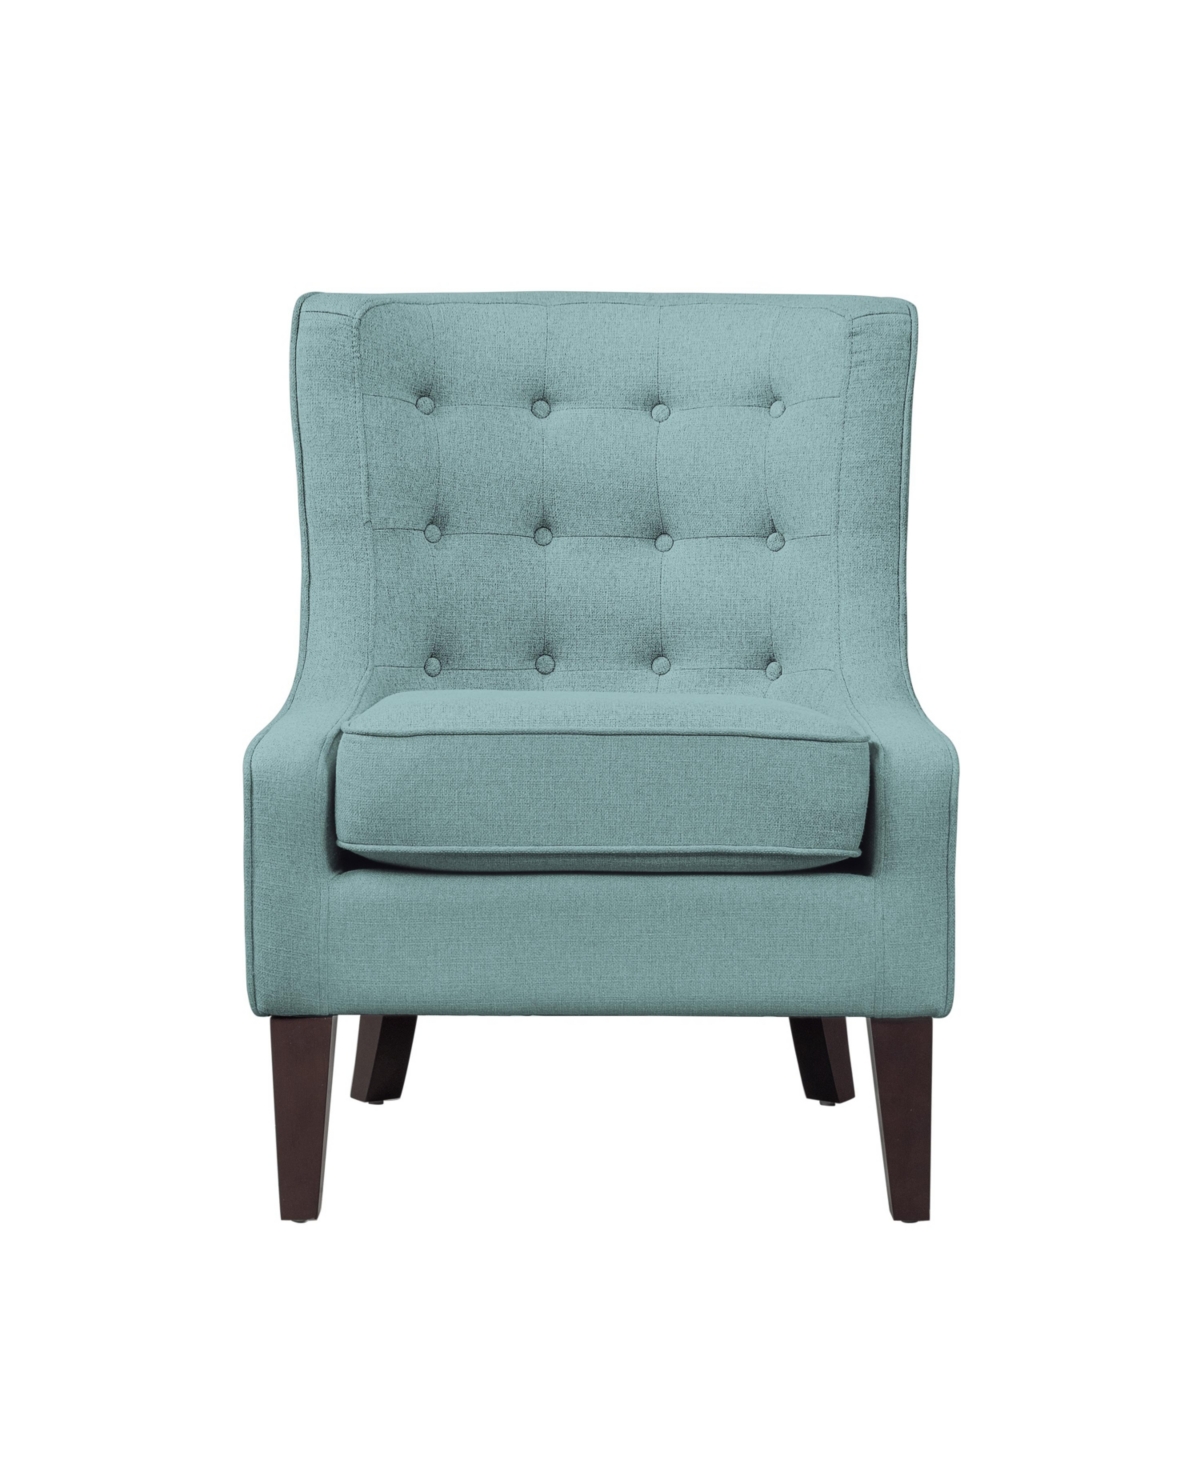 Lifestyle Solutions 36.8" Polyester Iona Accent Chair In Aqua